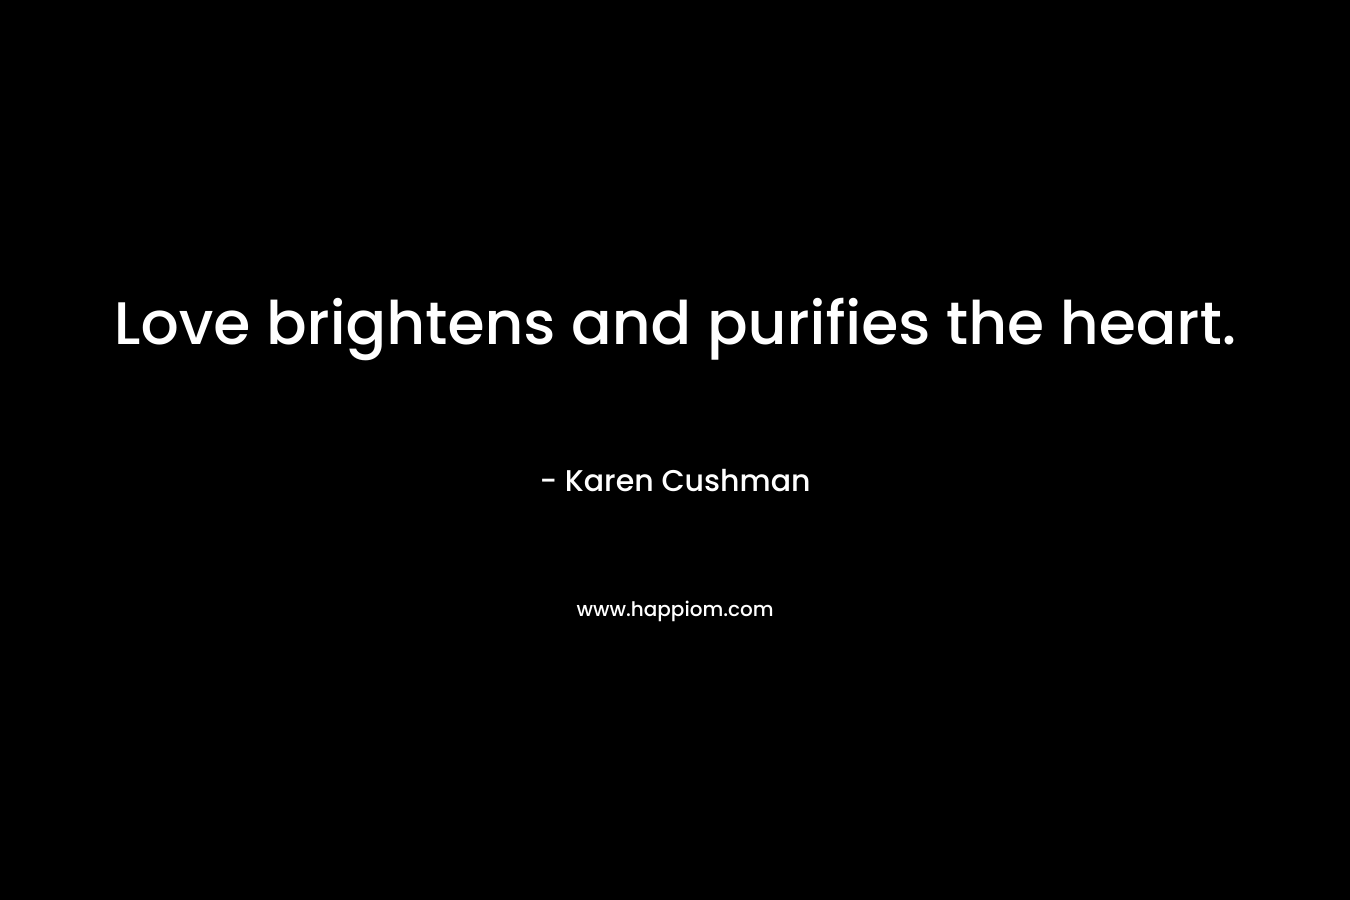 Love brightens and purifies the heart.